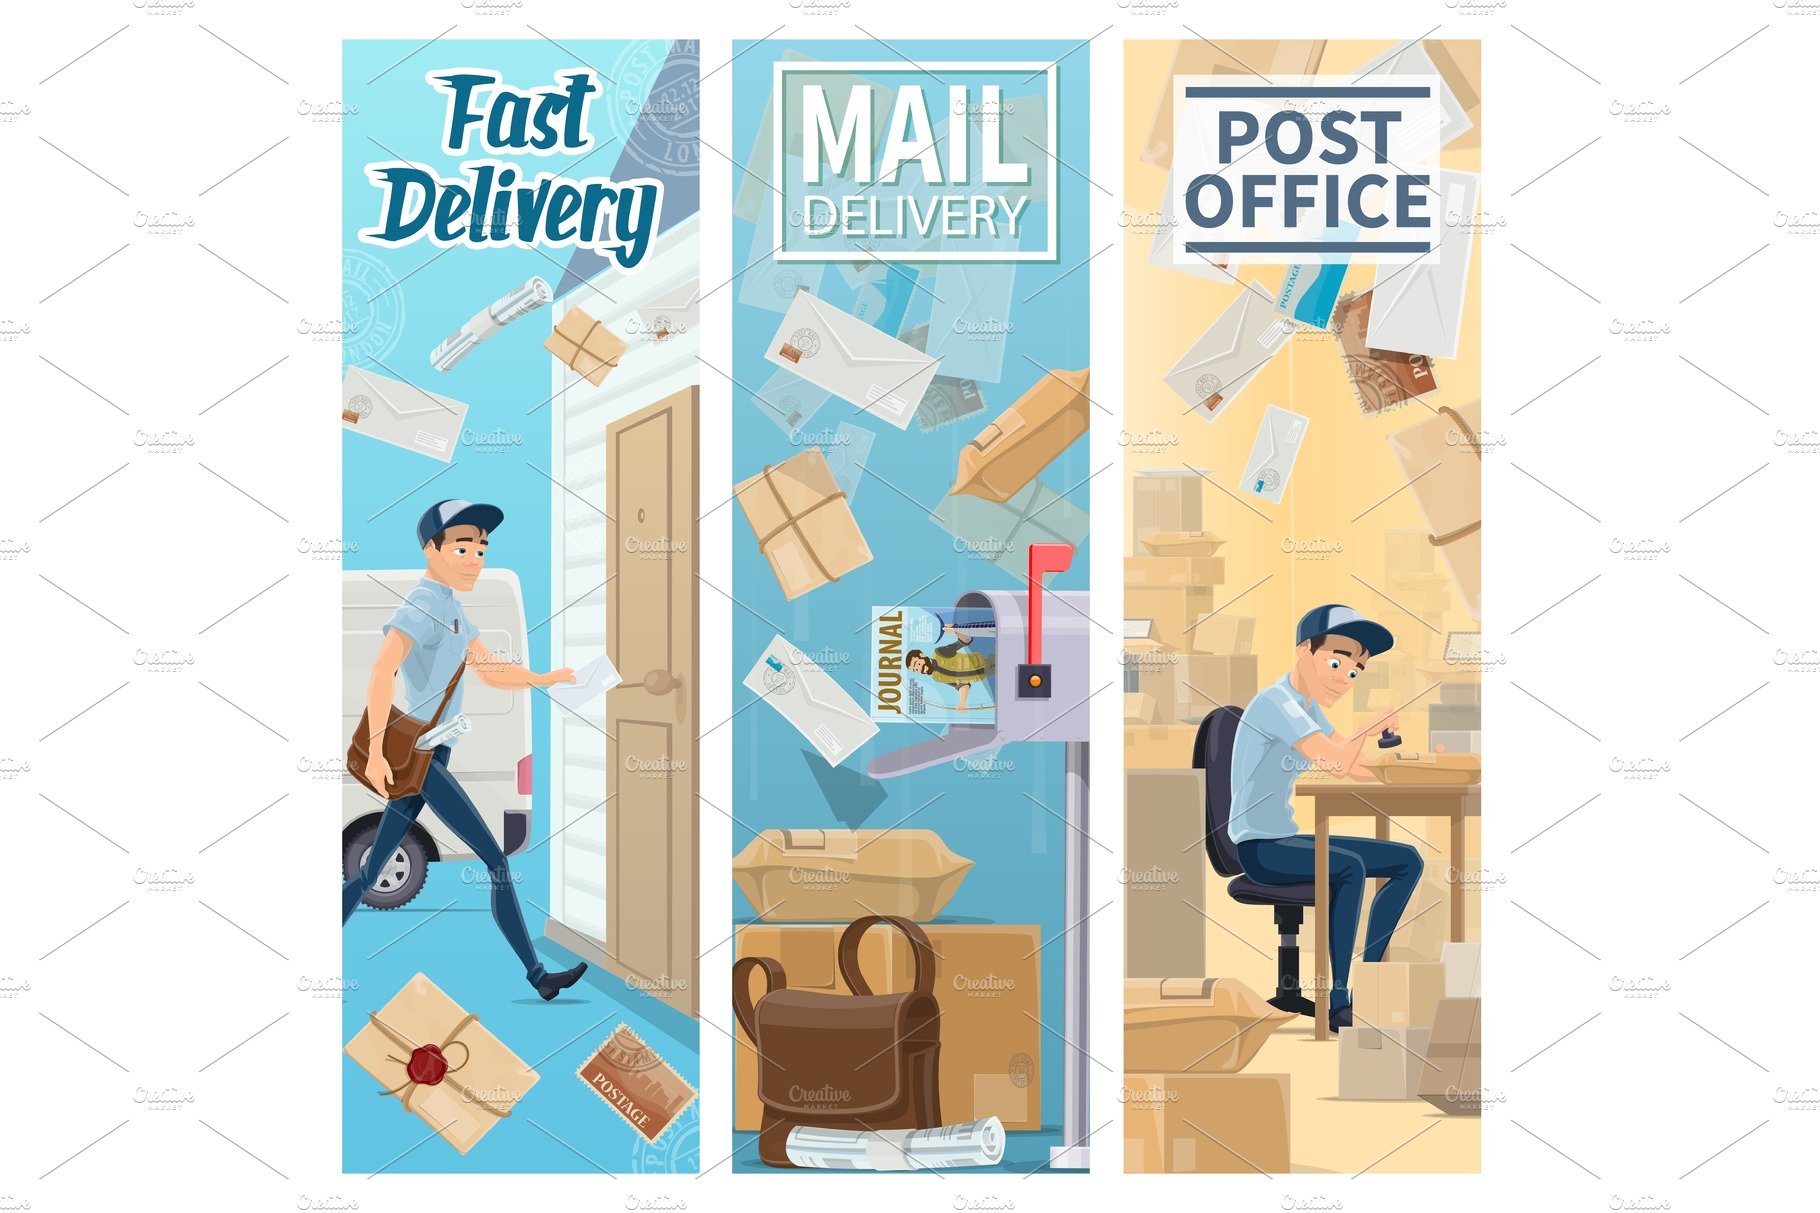 Post office, postman. Mail delivery cover image.